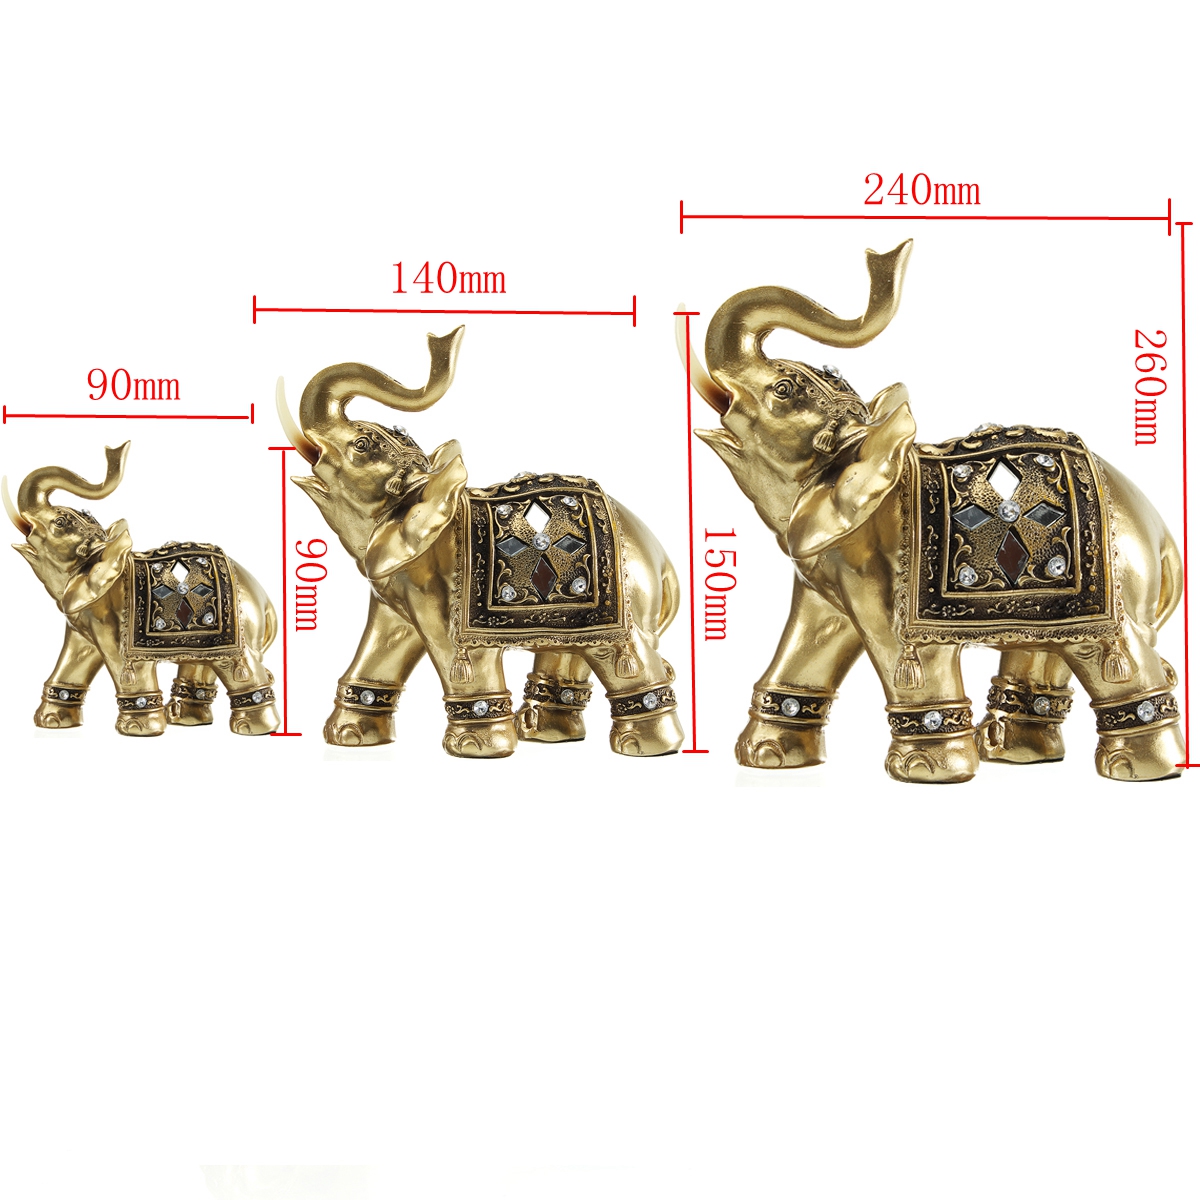 Lucky-Charm-Fengshui-Mascot-Golden-Elephant-Resin-Mini-Statue-Home-Desk-Ornaments-Gifts-Home-Decorat-1634232-12